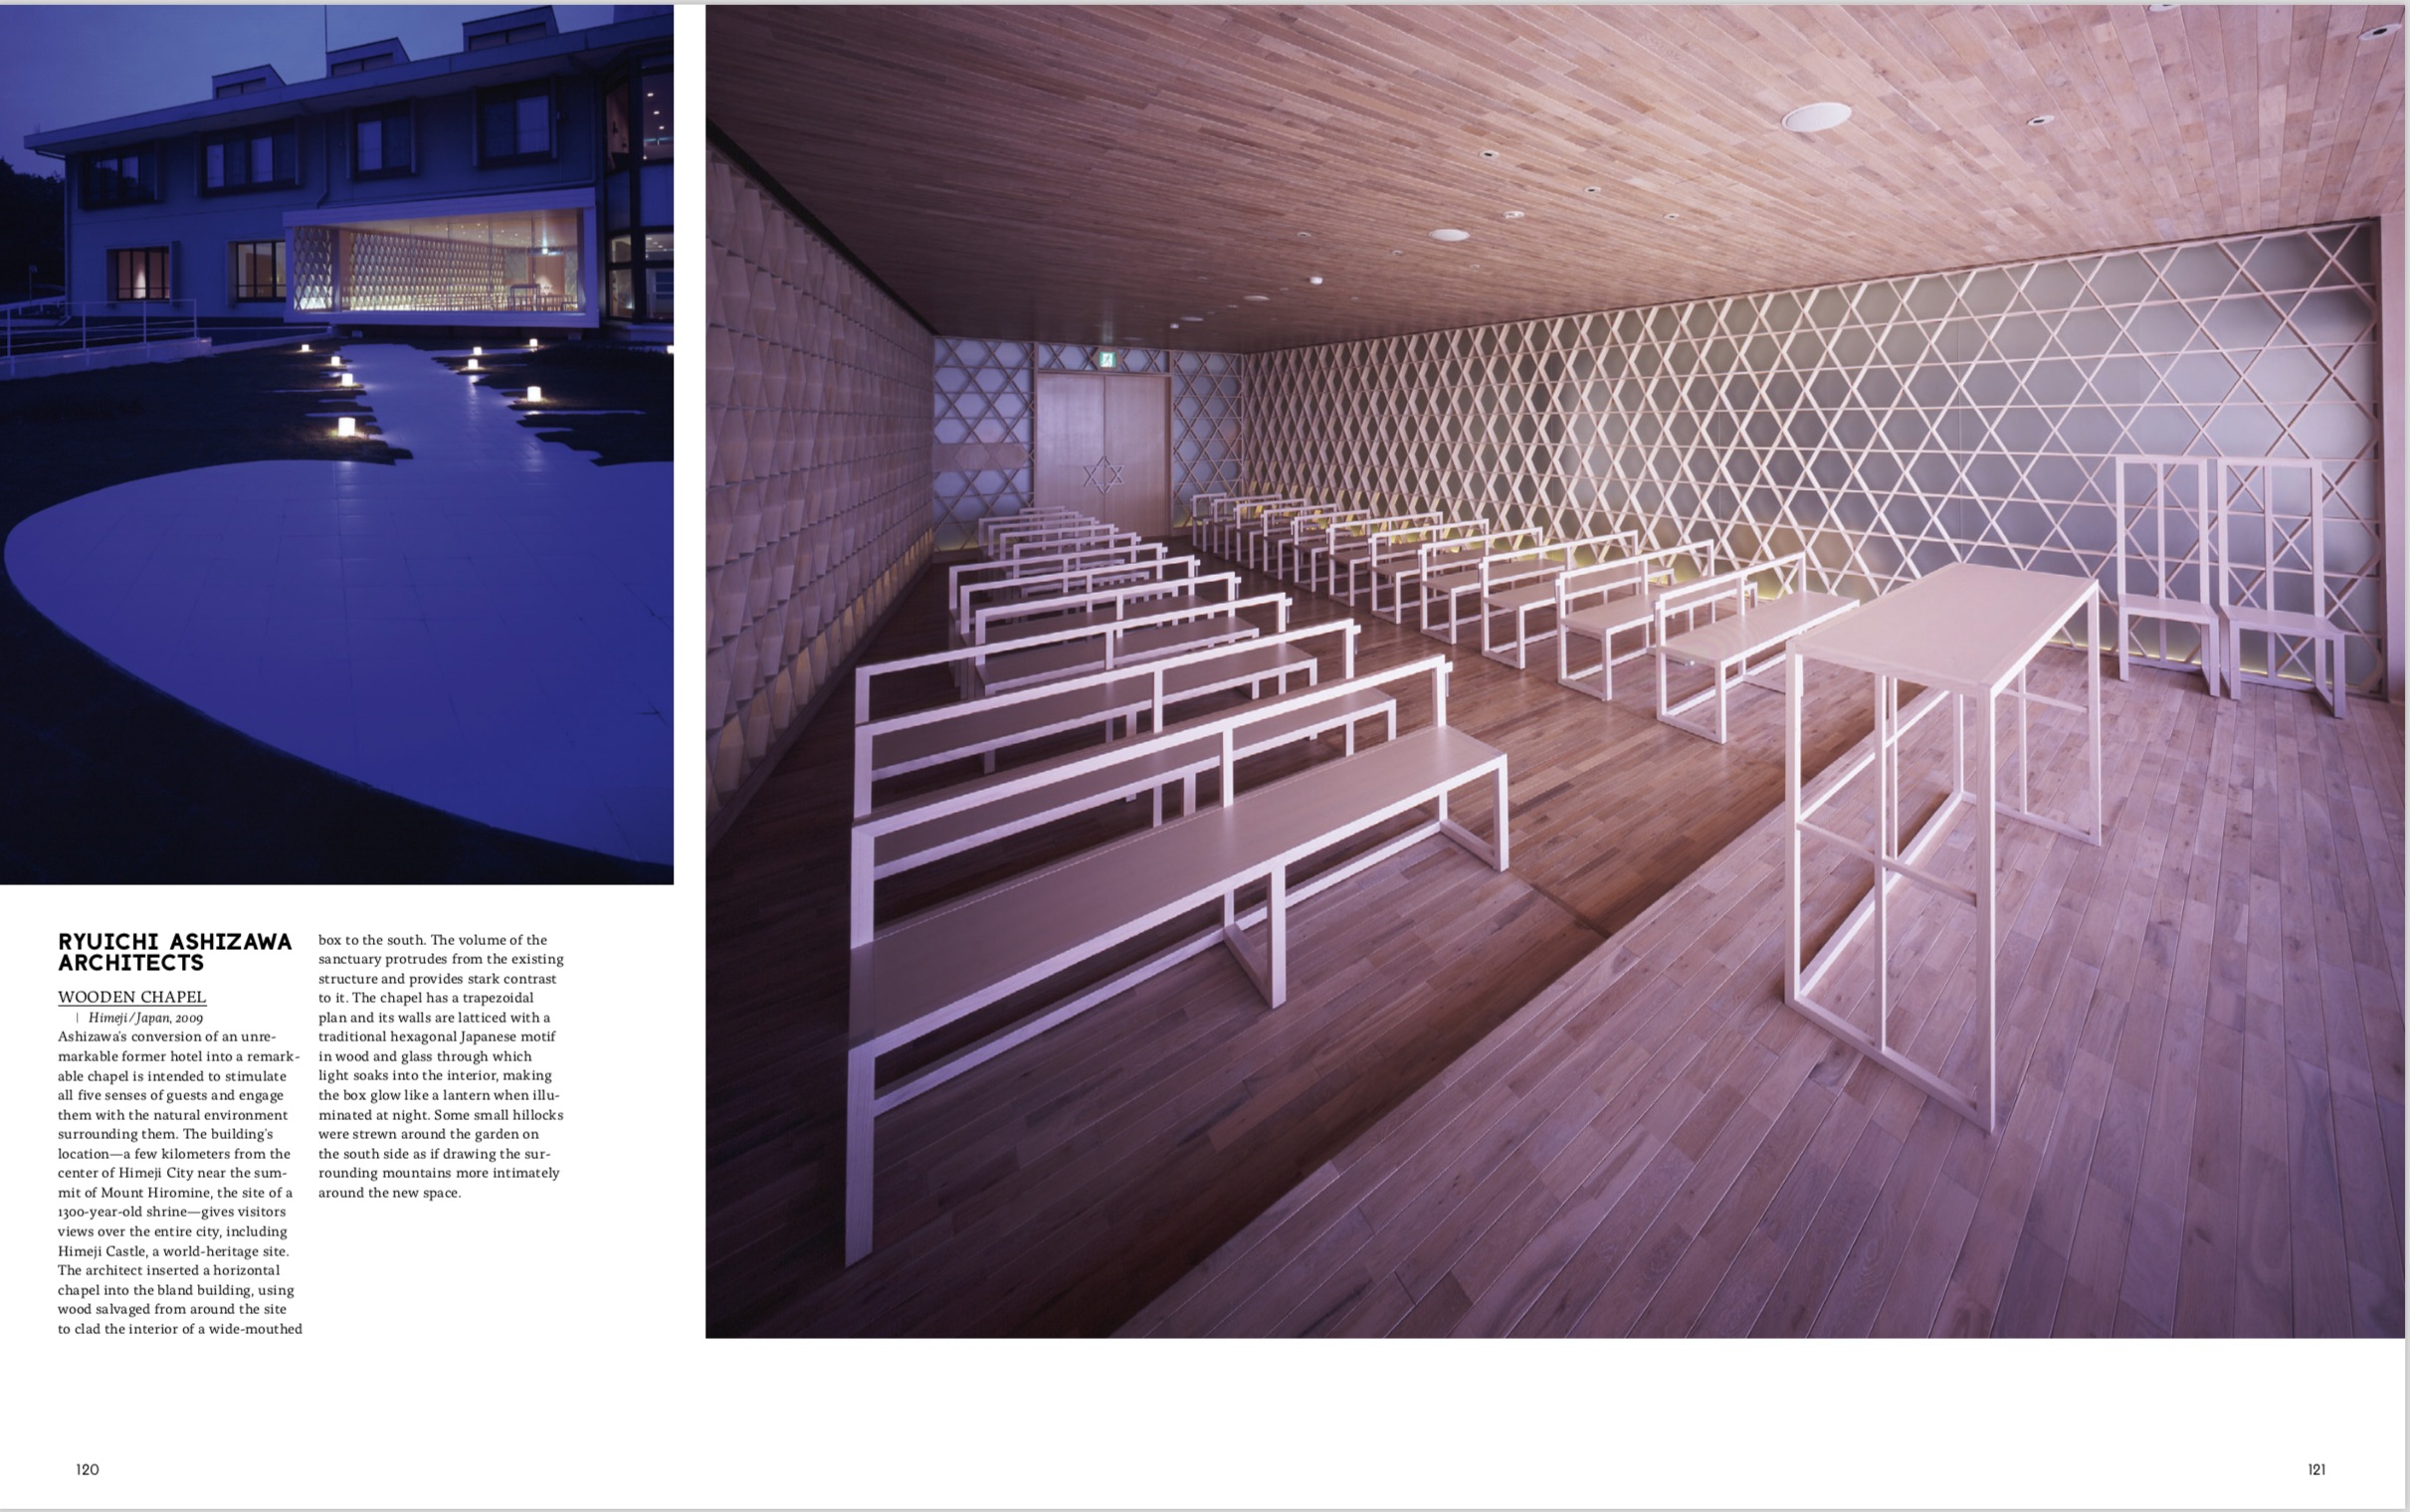 By Robert Klanten, K.Bolhofer, B.Meyer from Sublime: New Design and Architecture from Japan copyright Gestalten 2011